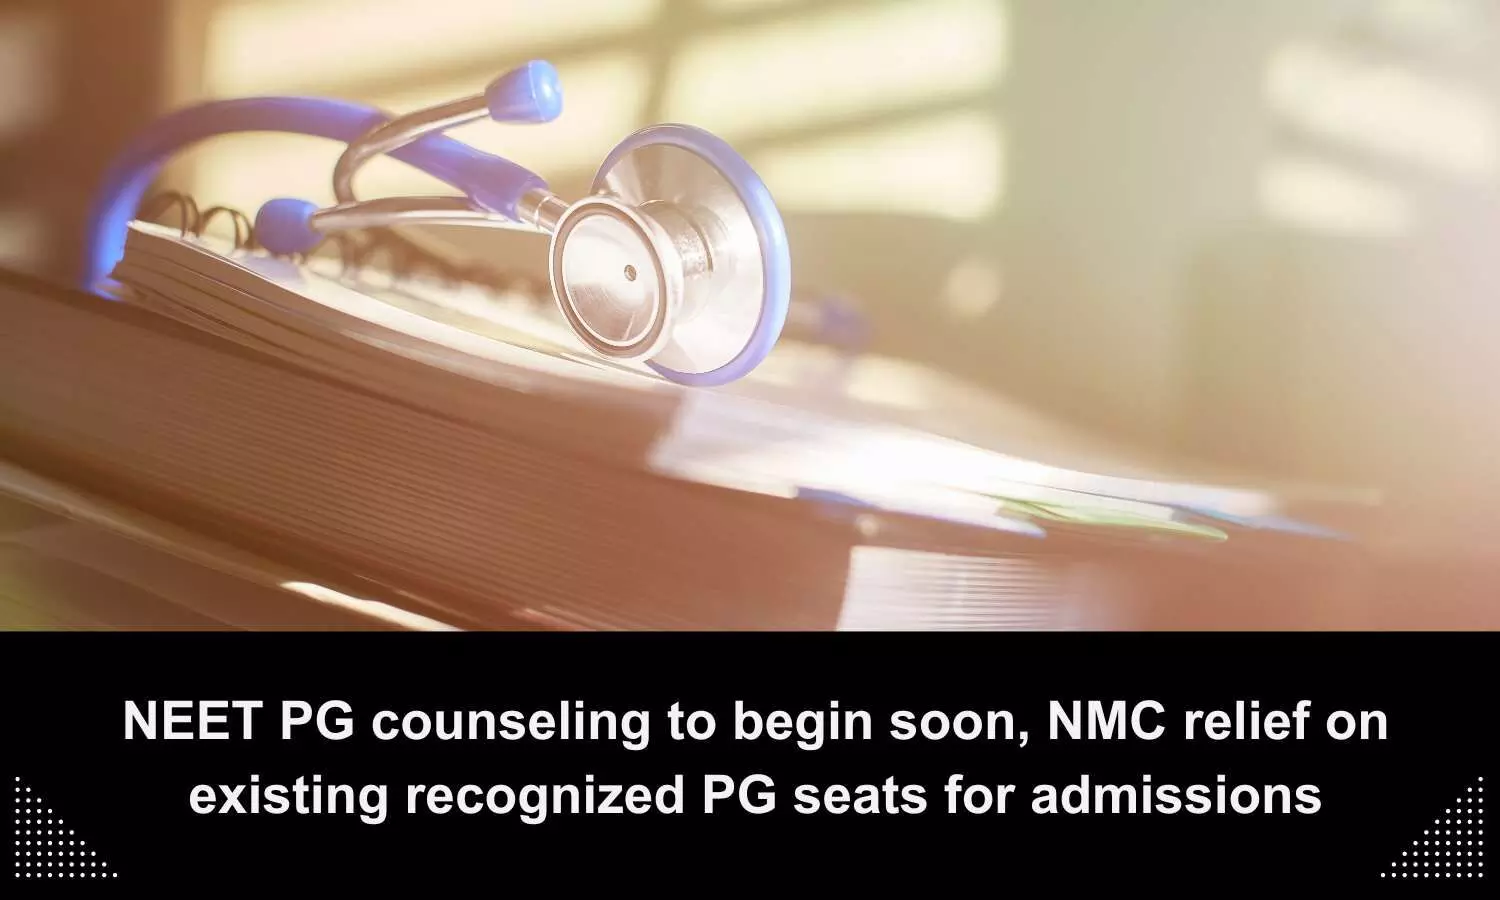 NEET PG counseling to start soon, NMC relief on existing recognized PG seats for admissions